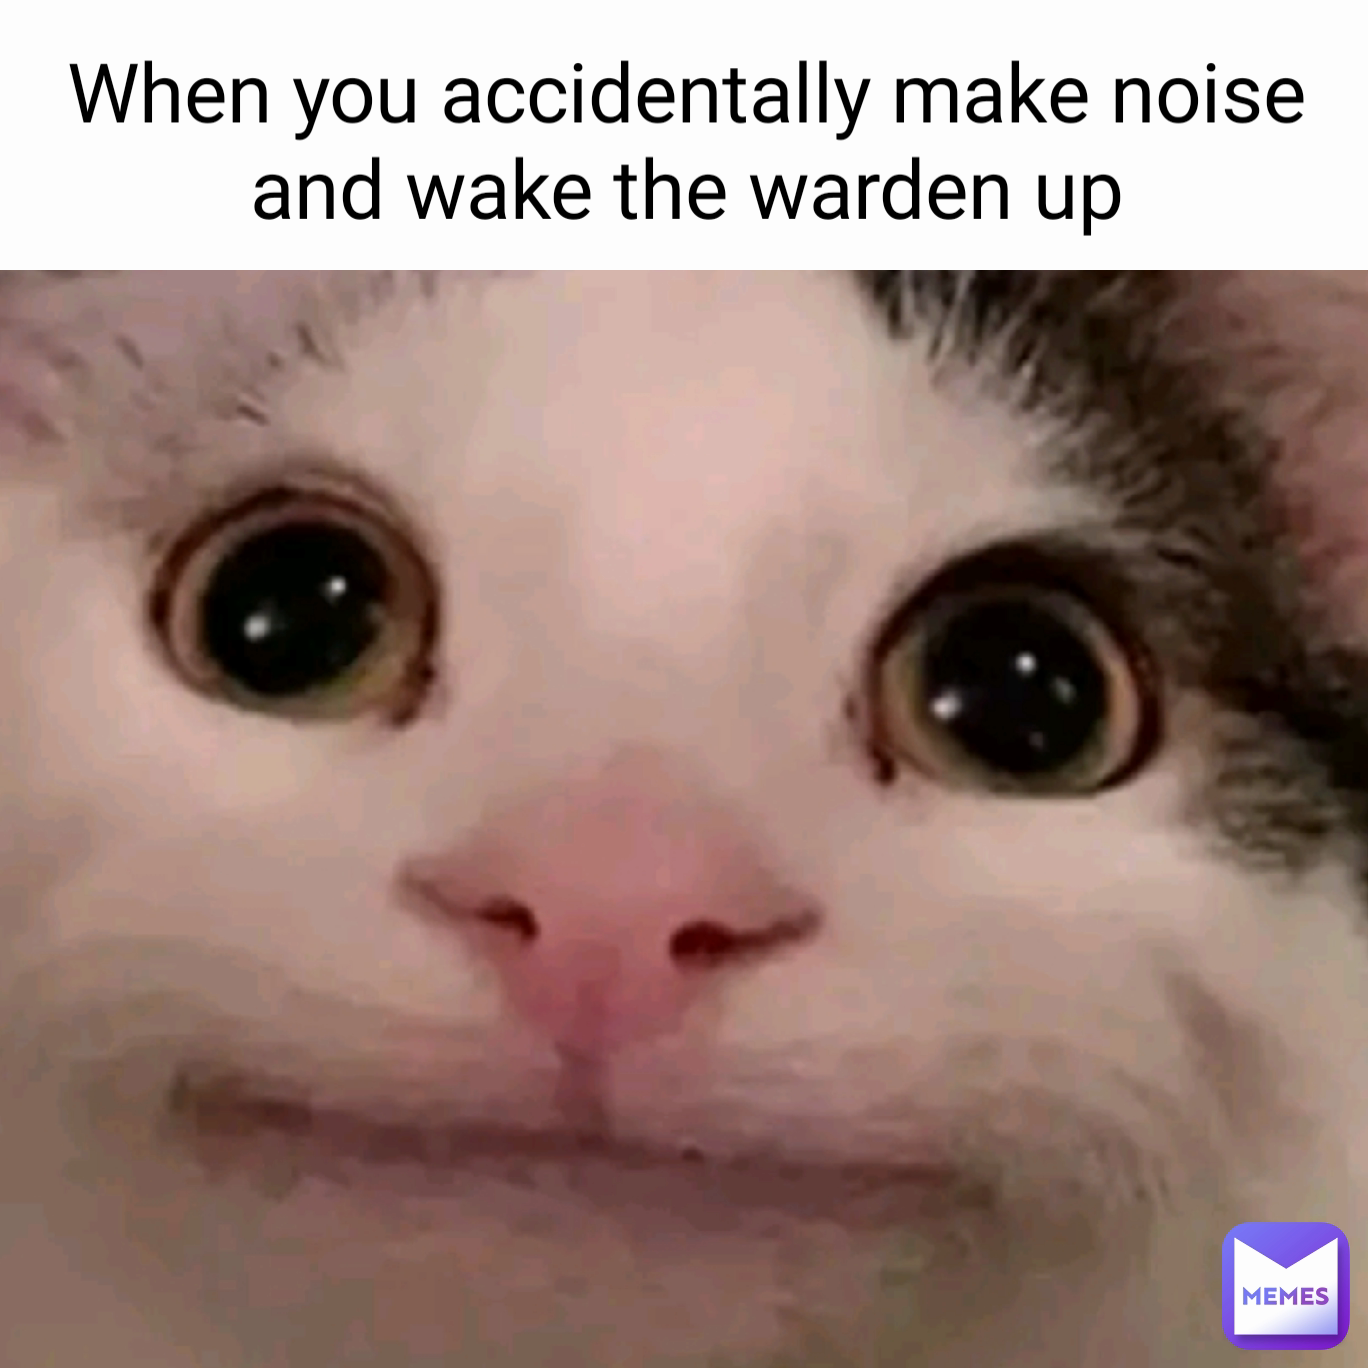 When you accidentally make noise and wake the warden up